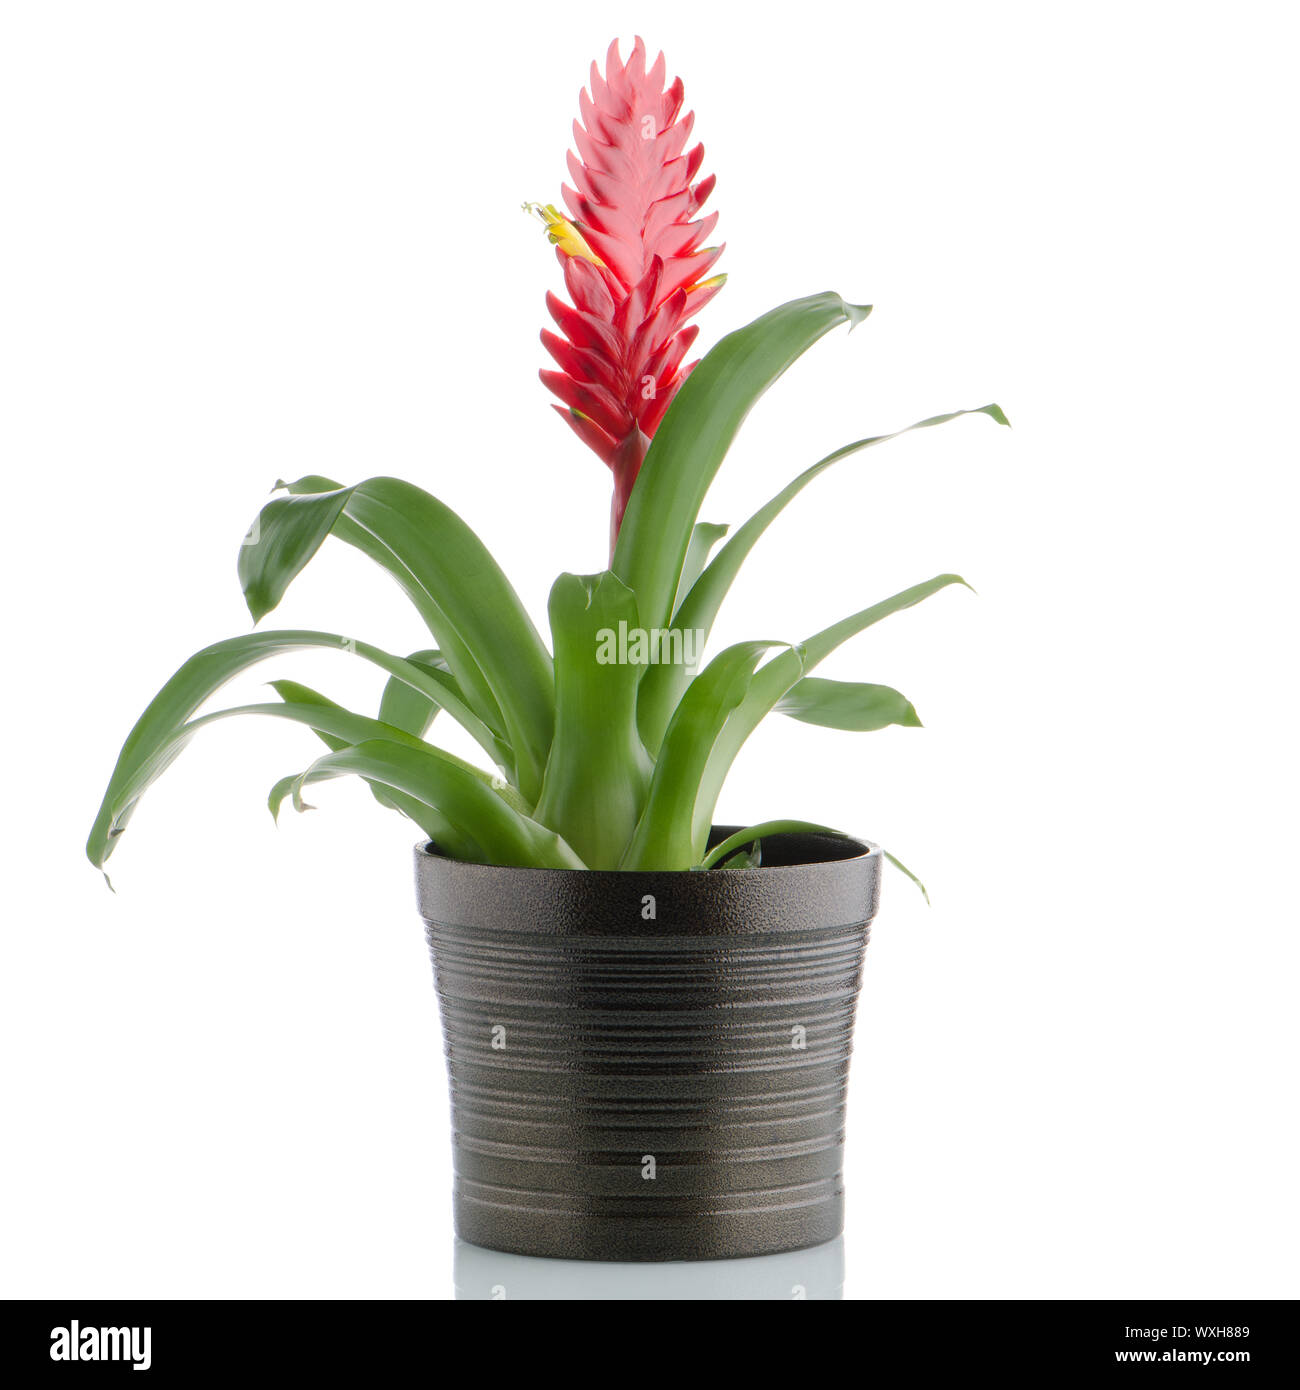 Red bromelia flower on white background. Stock Photo